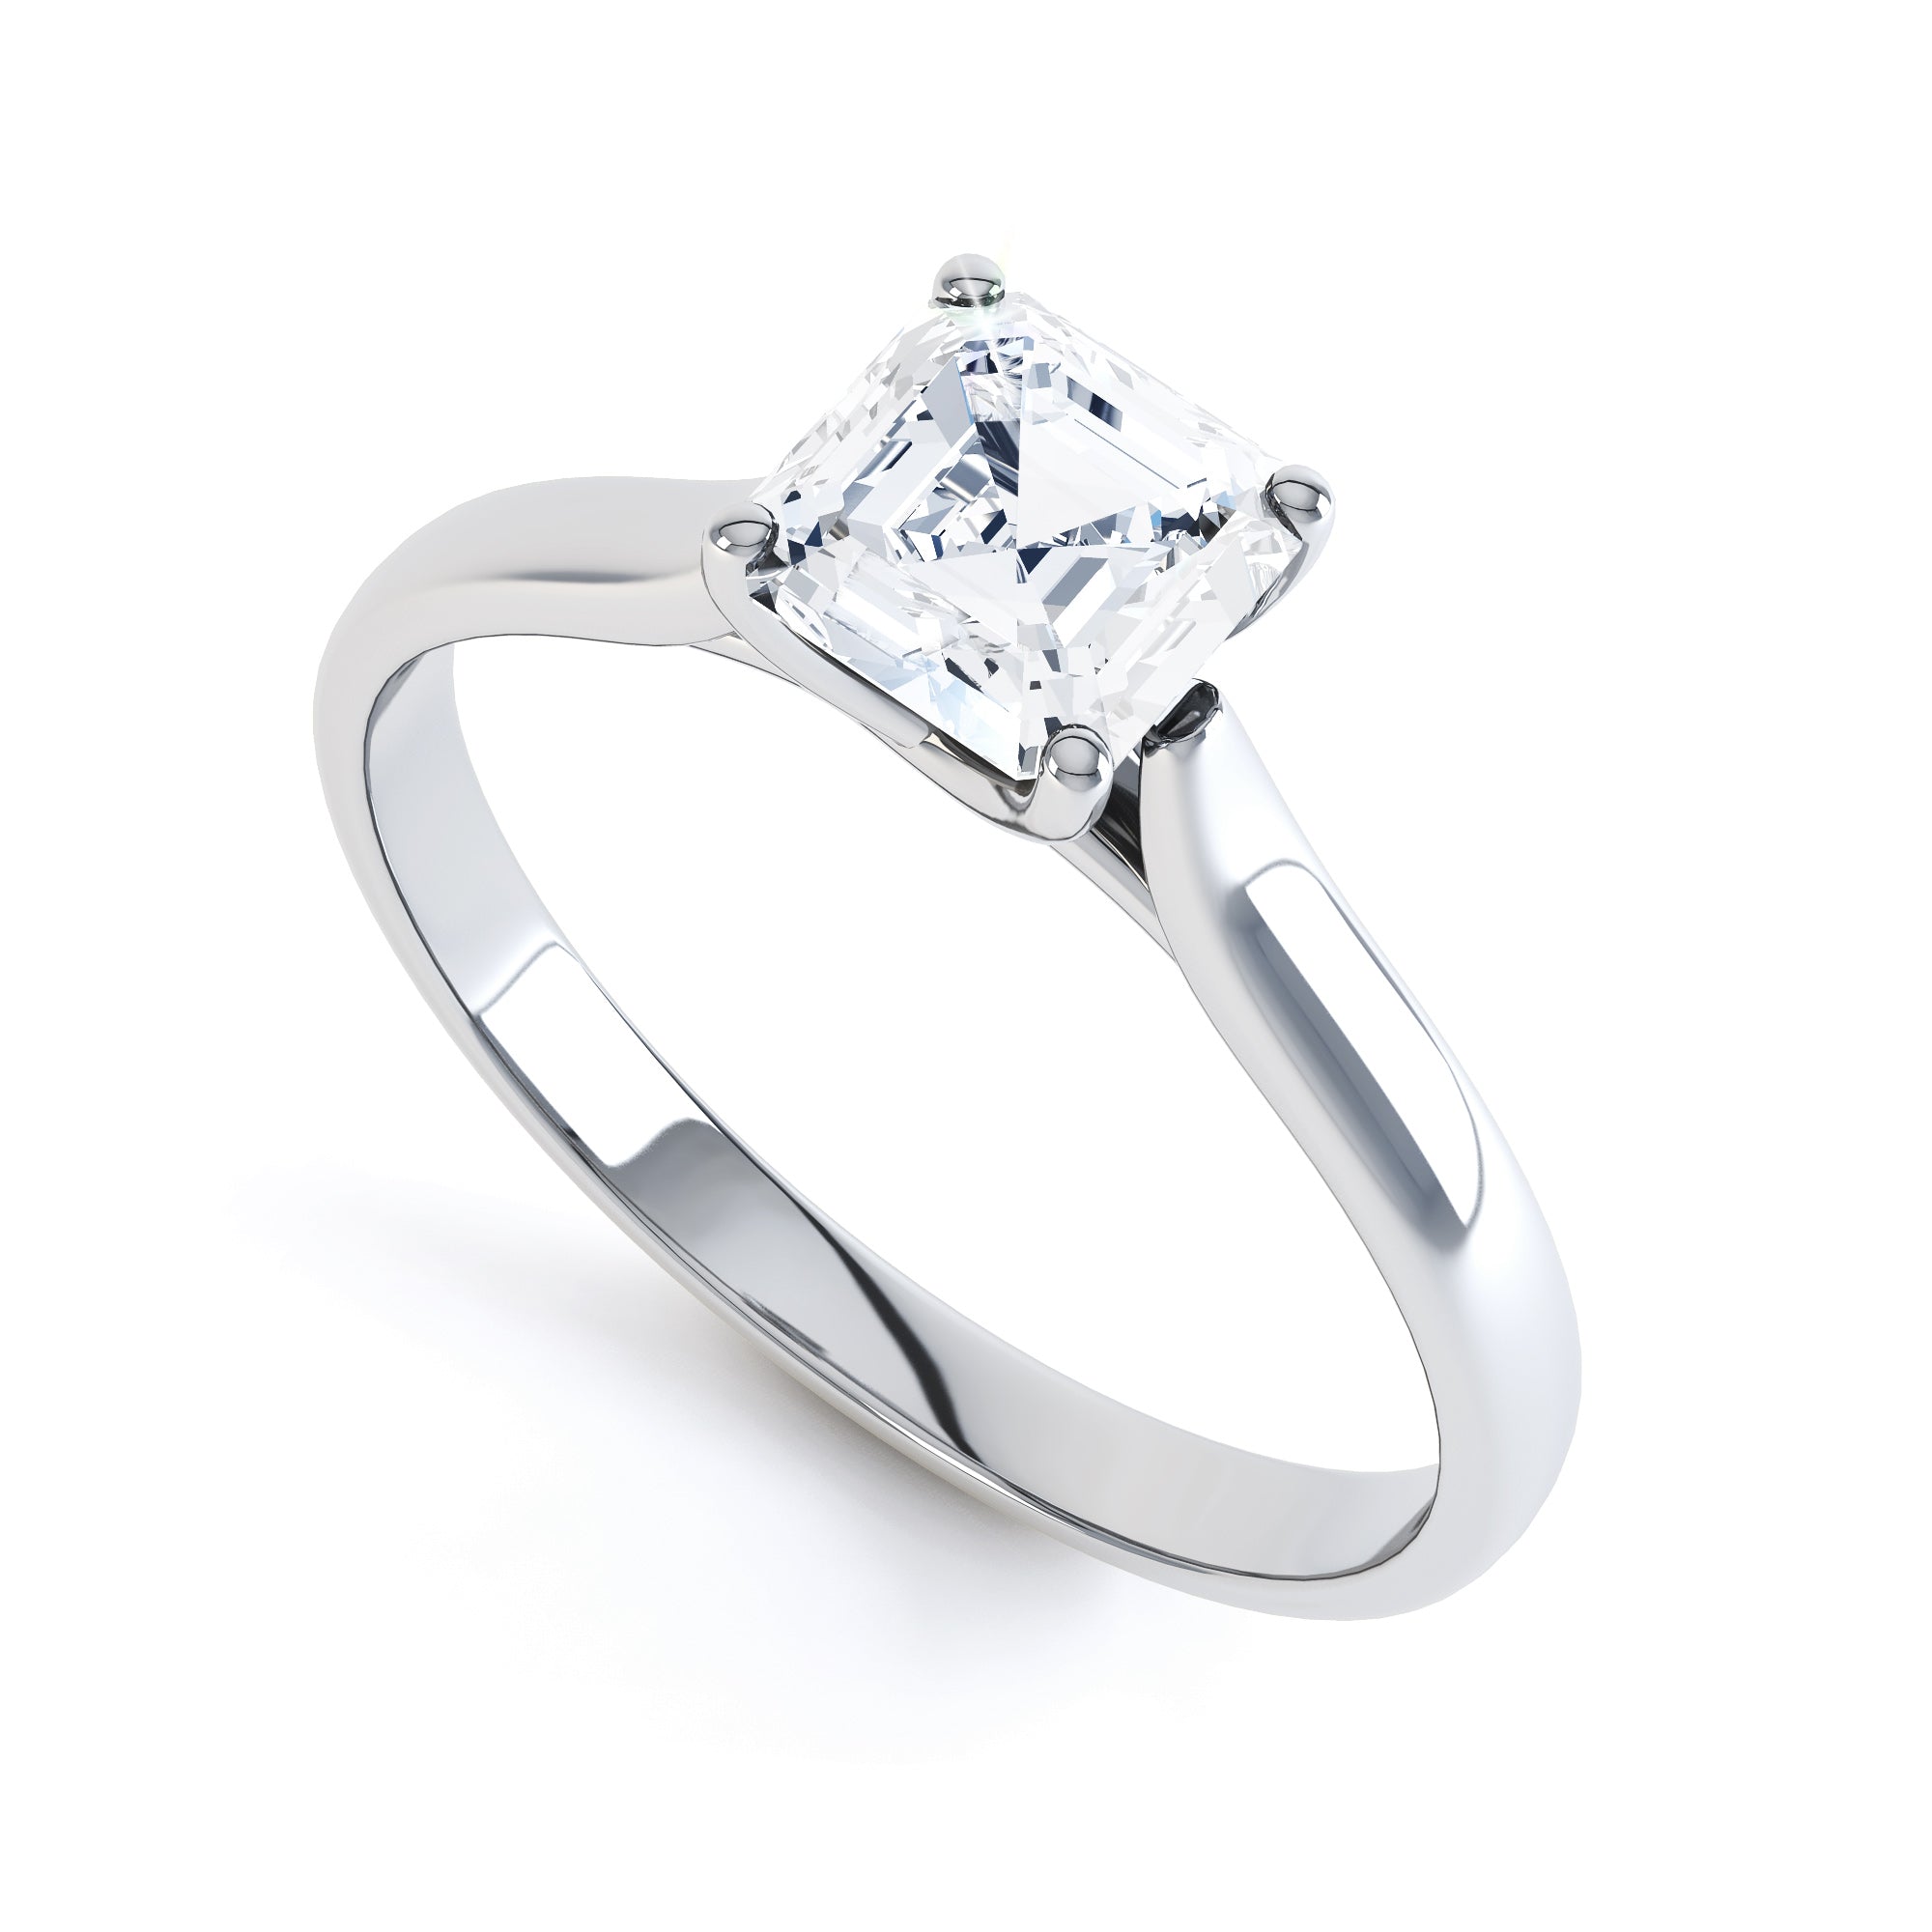 Asscher Cut Centre Stone, 4 claw, Diamond Engagement Ring with Tapered Shoulders